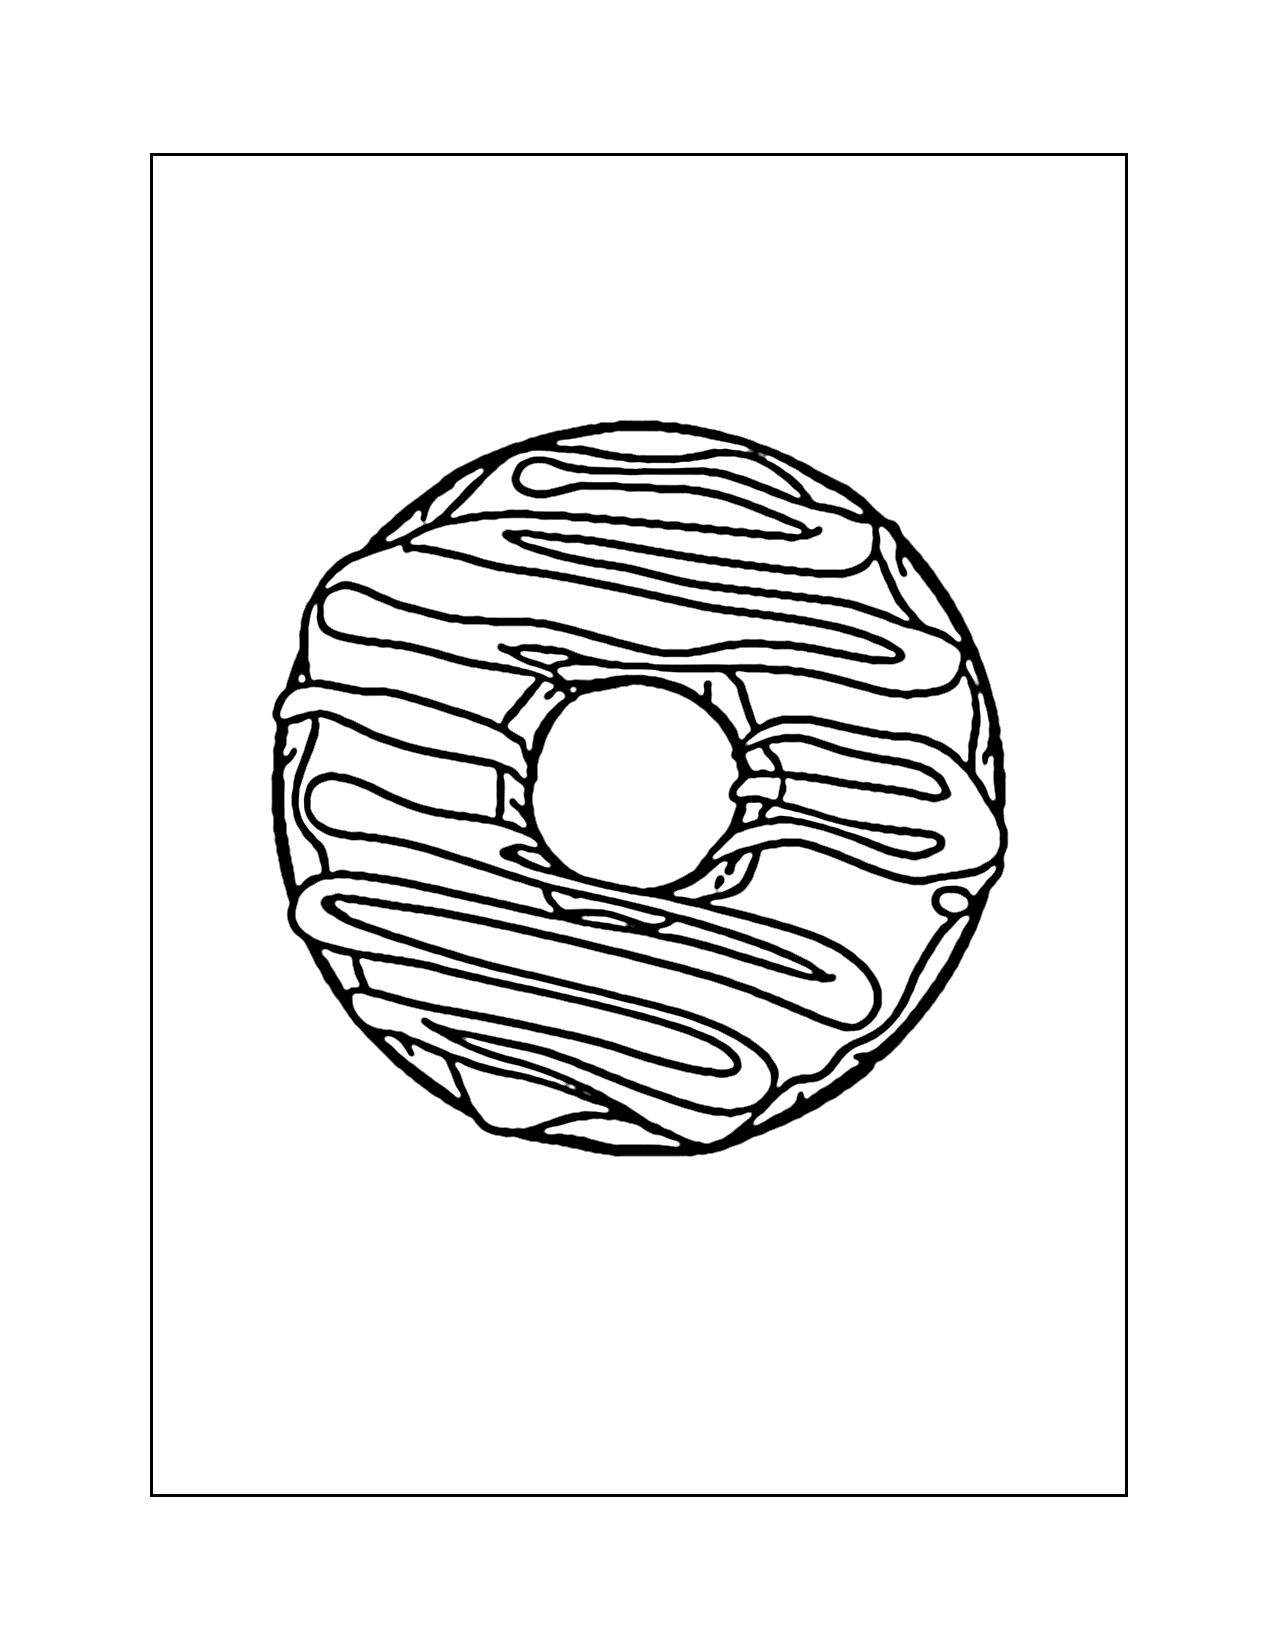 Bagel With Topping Coloring Page